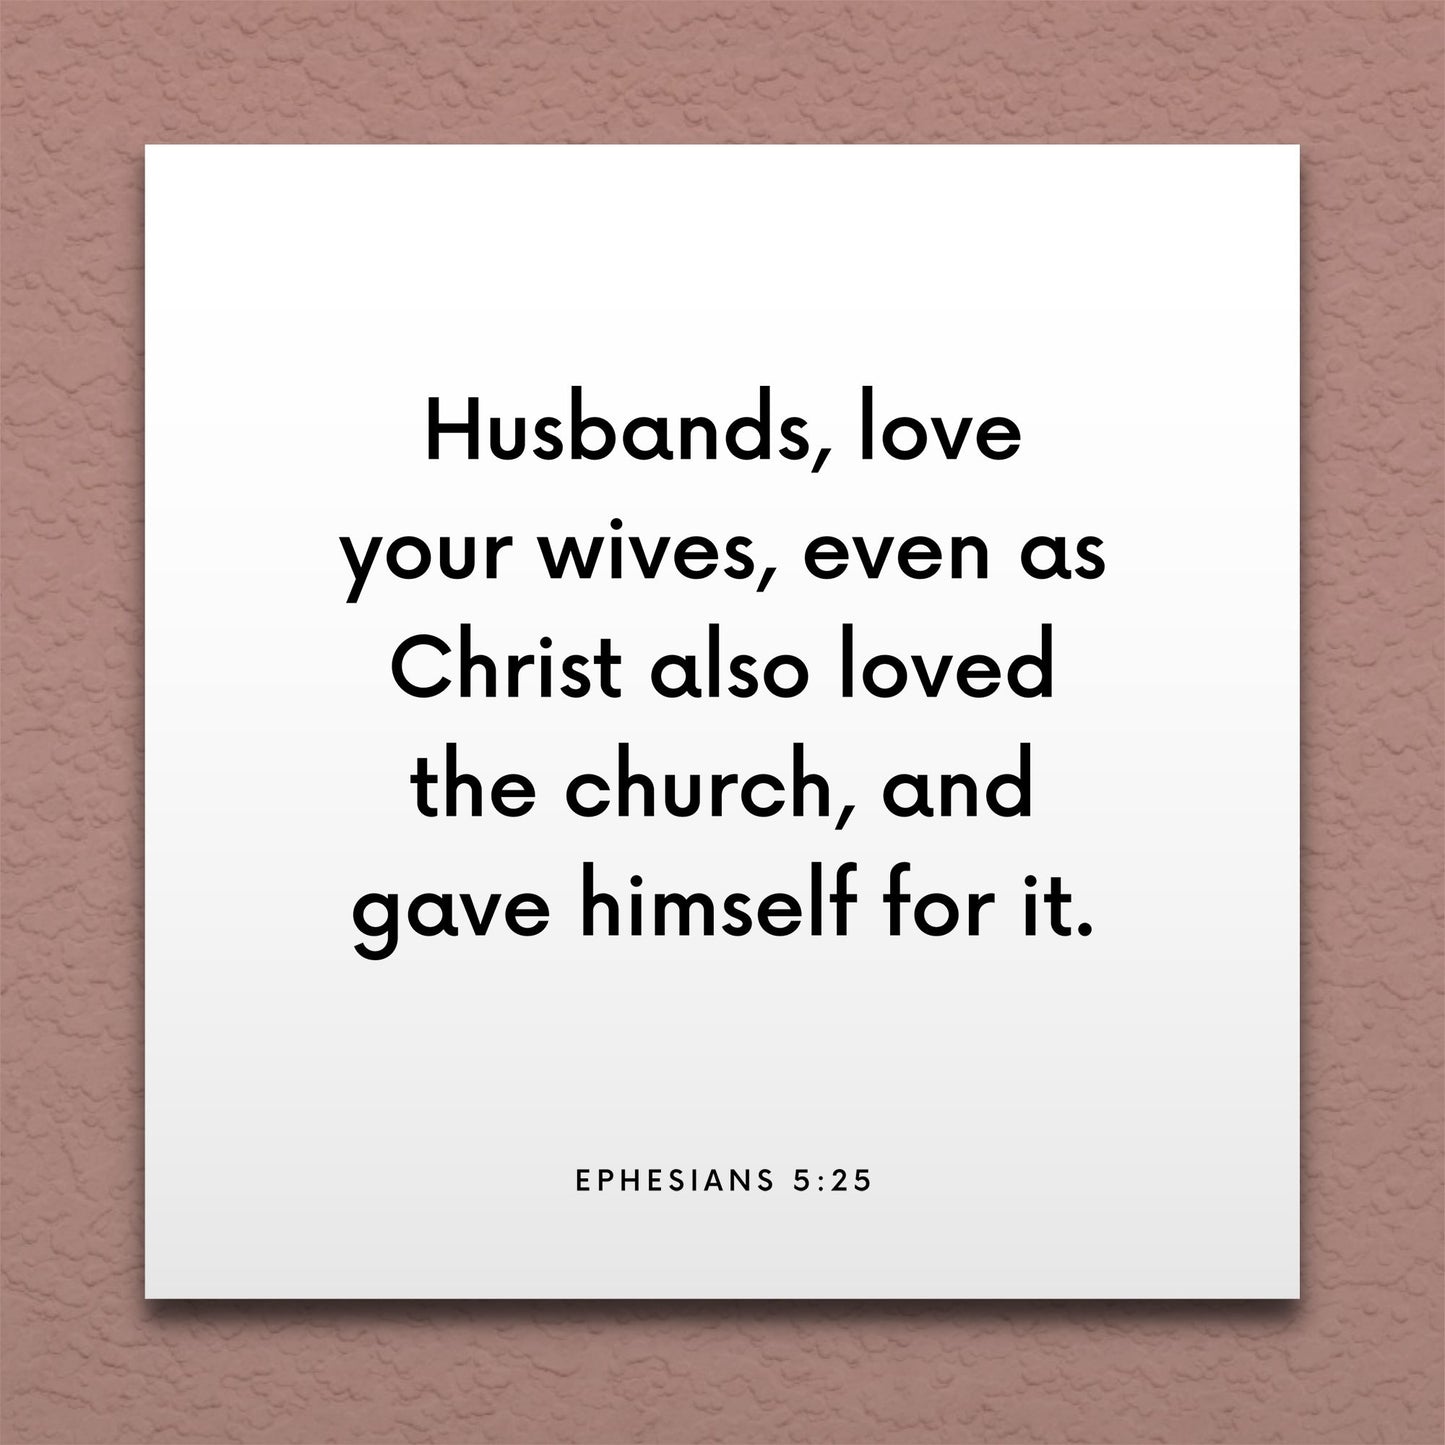 Wall-mounted scripture tile for Ephesians 5:25 - "Husbands, love your wives, even as Christ loved the church"